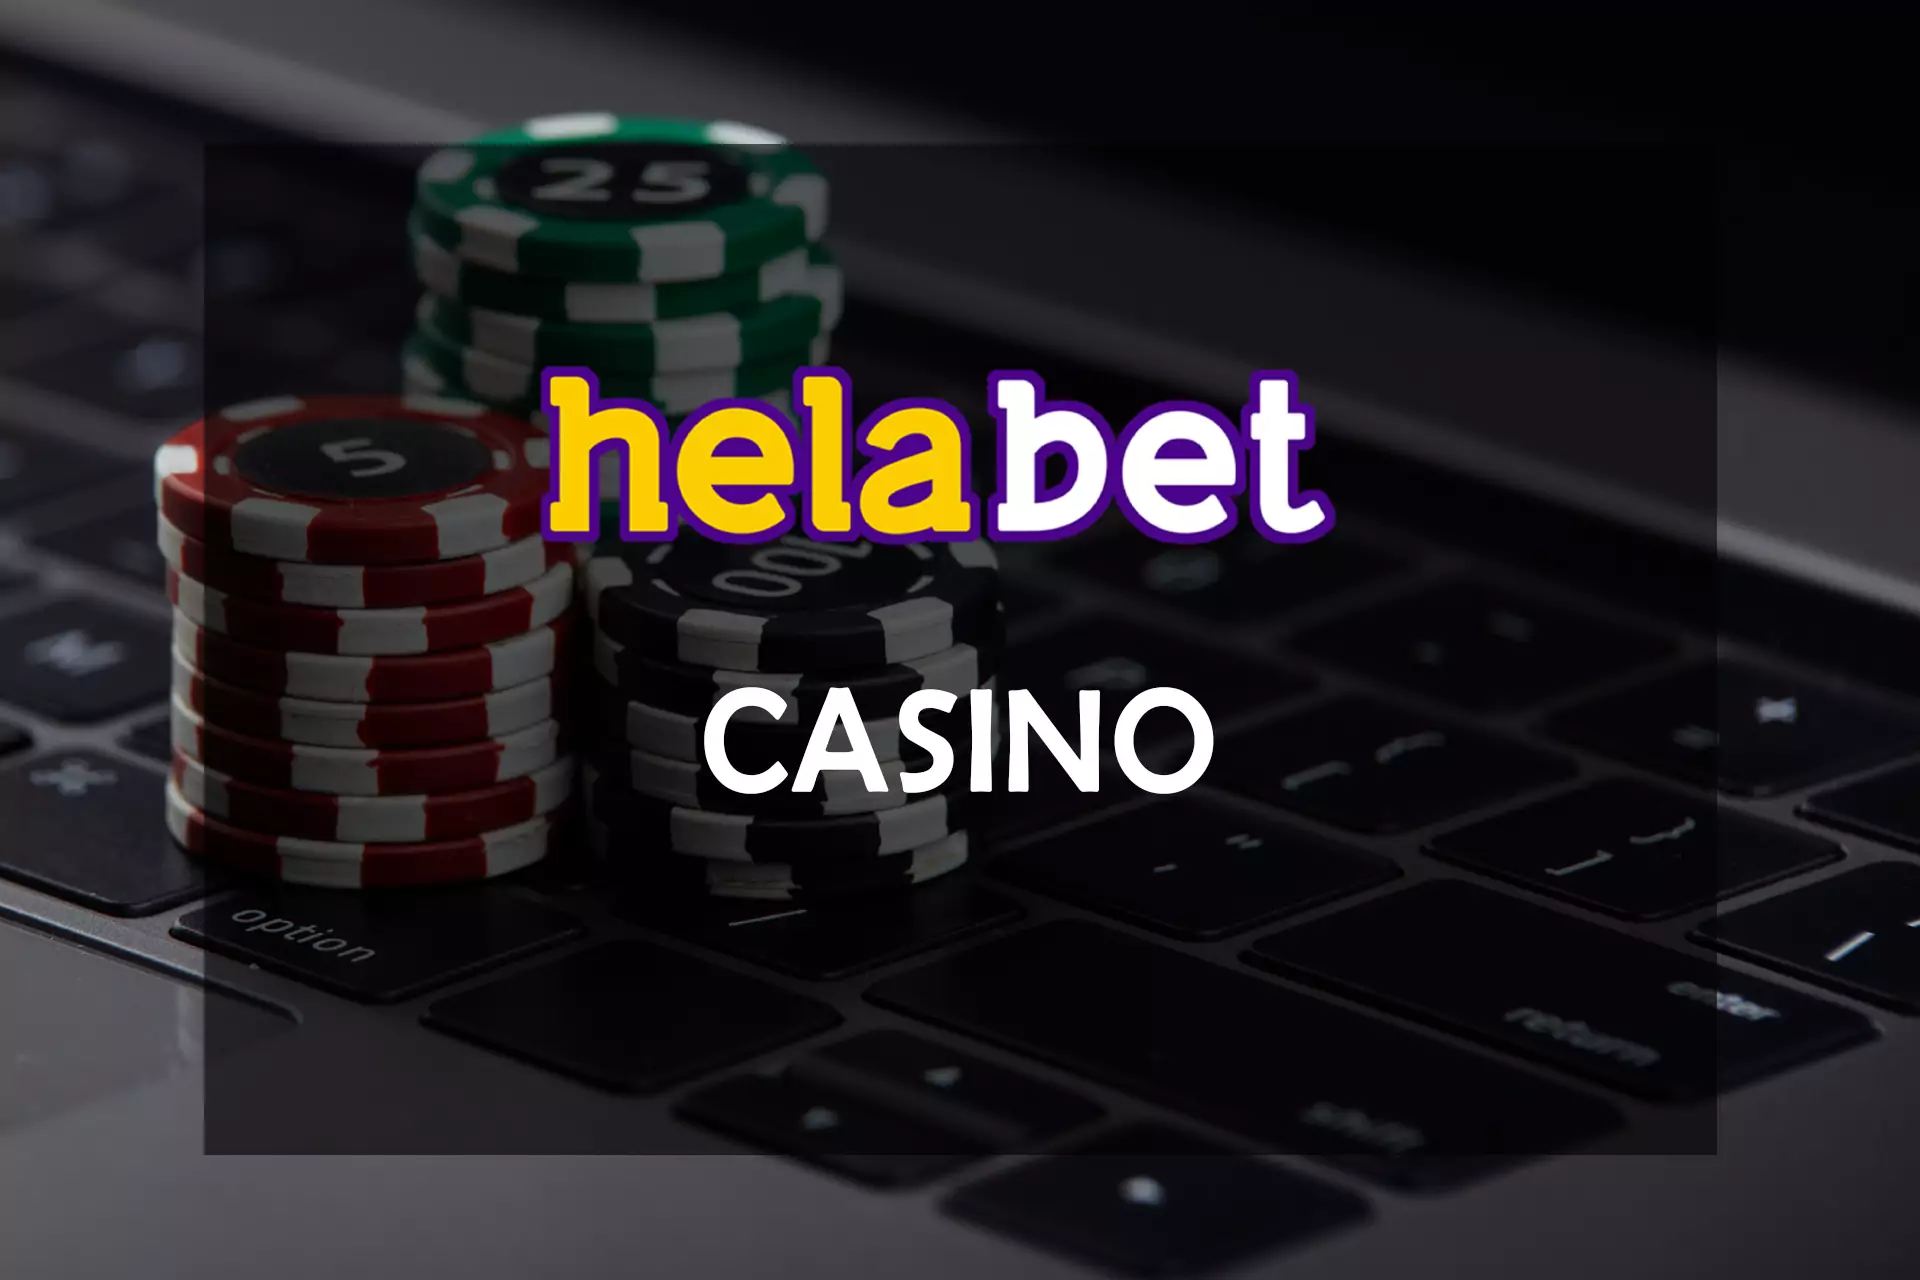 Helabet Casino offers many gambling games for Indian players.